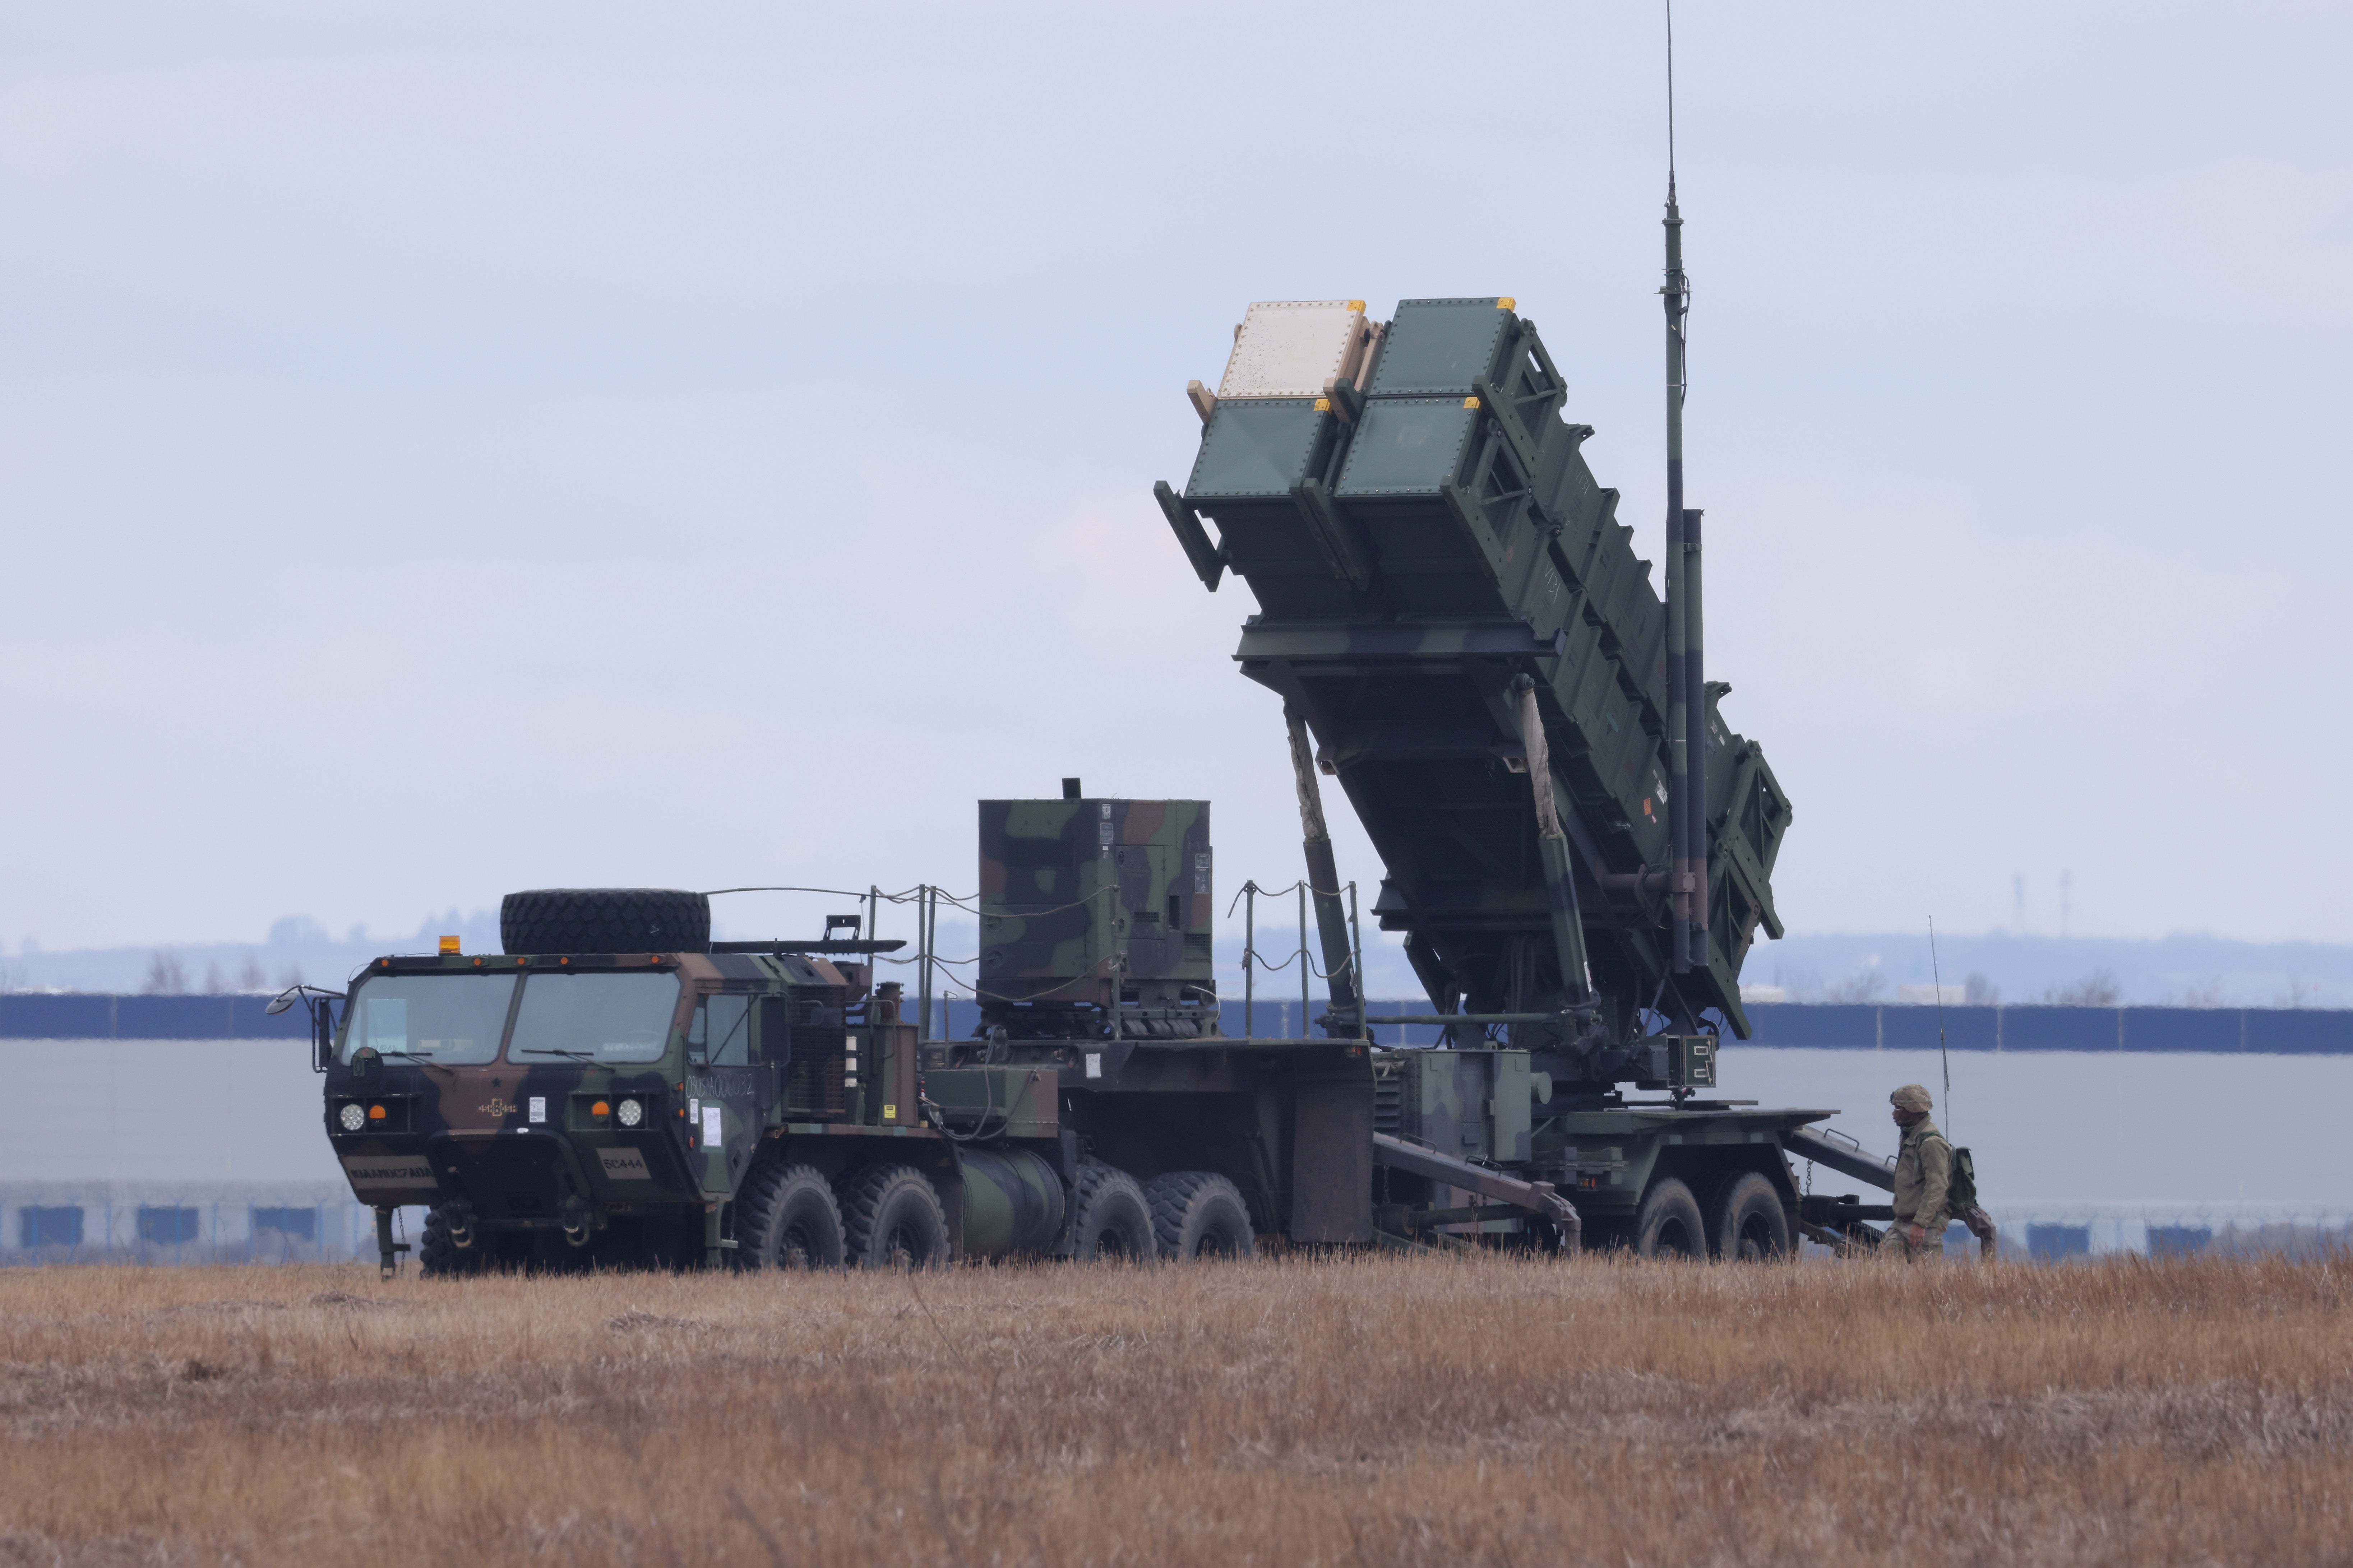 A US Army MIM-104 Patriot anti-missile defence launcher stands pointing east at Rzeszow Jasionska airport, an airport currently being used by the US Army’s 82nd Airborne Division, on 8 March near Rzeszow, Poland